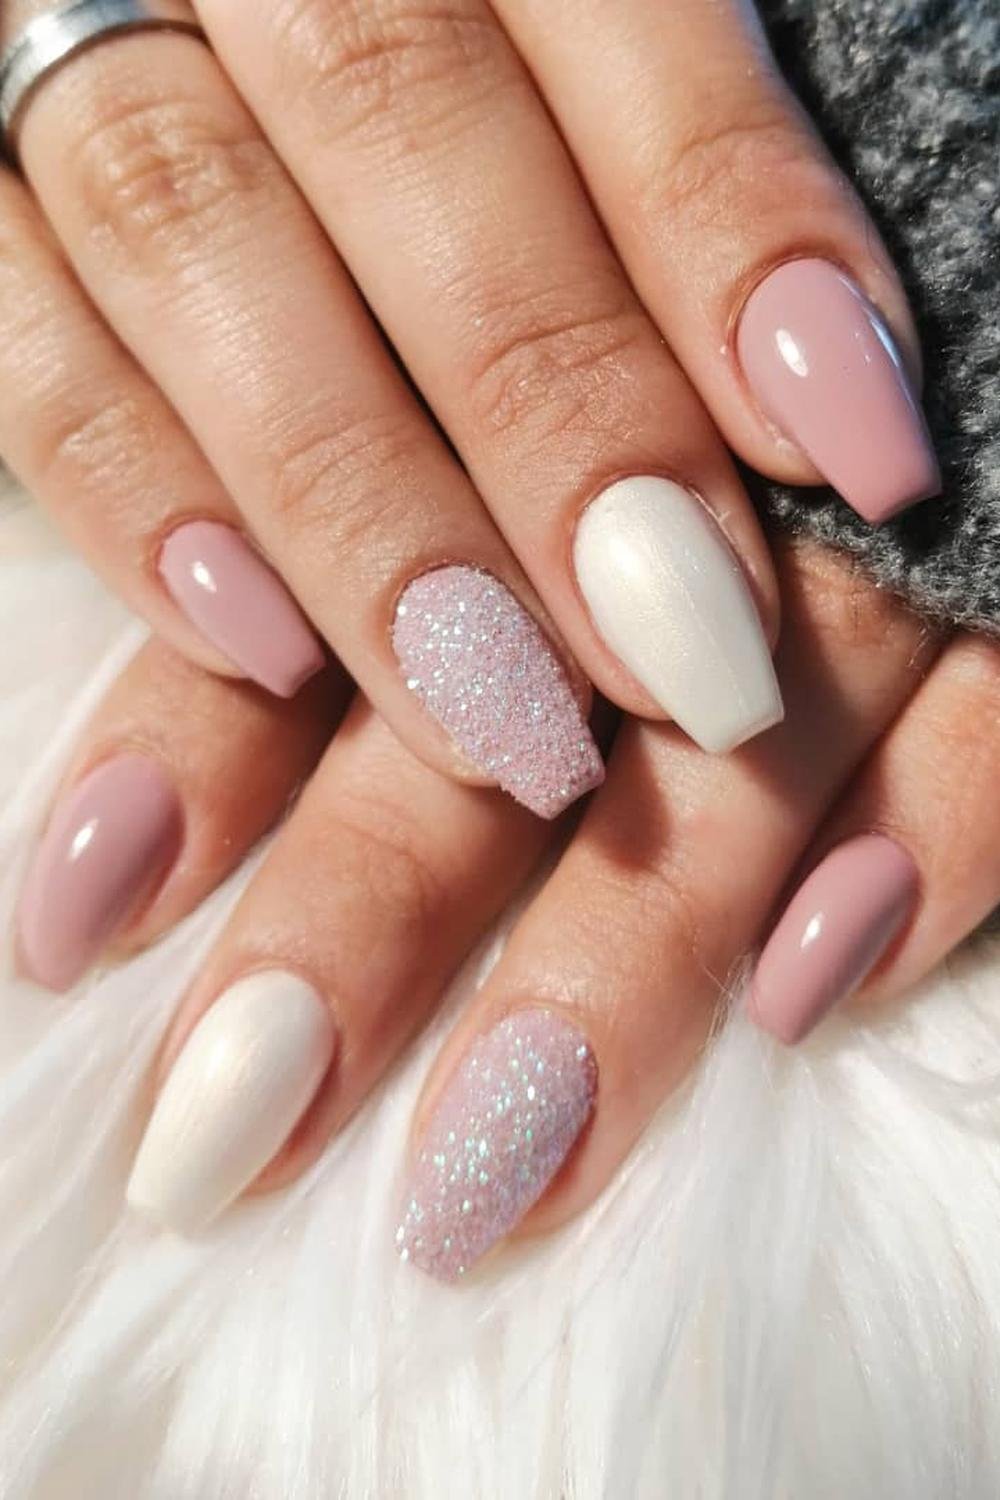 33 - Picture of Ballerina Nails